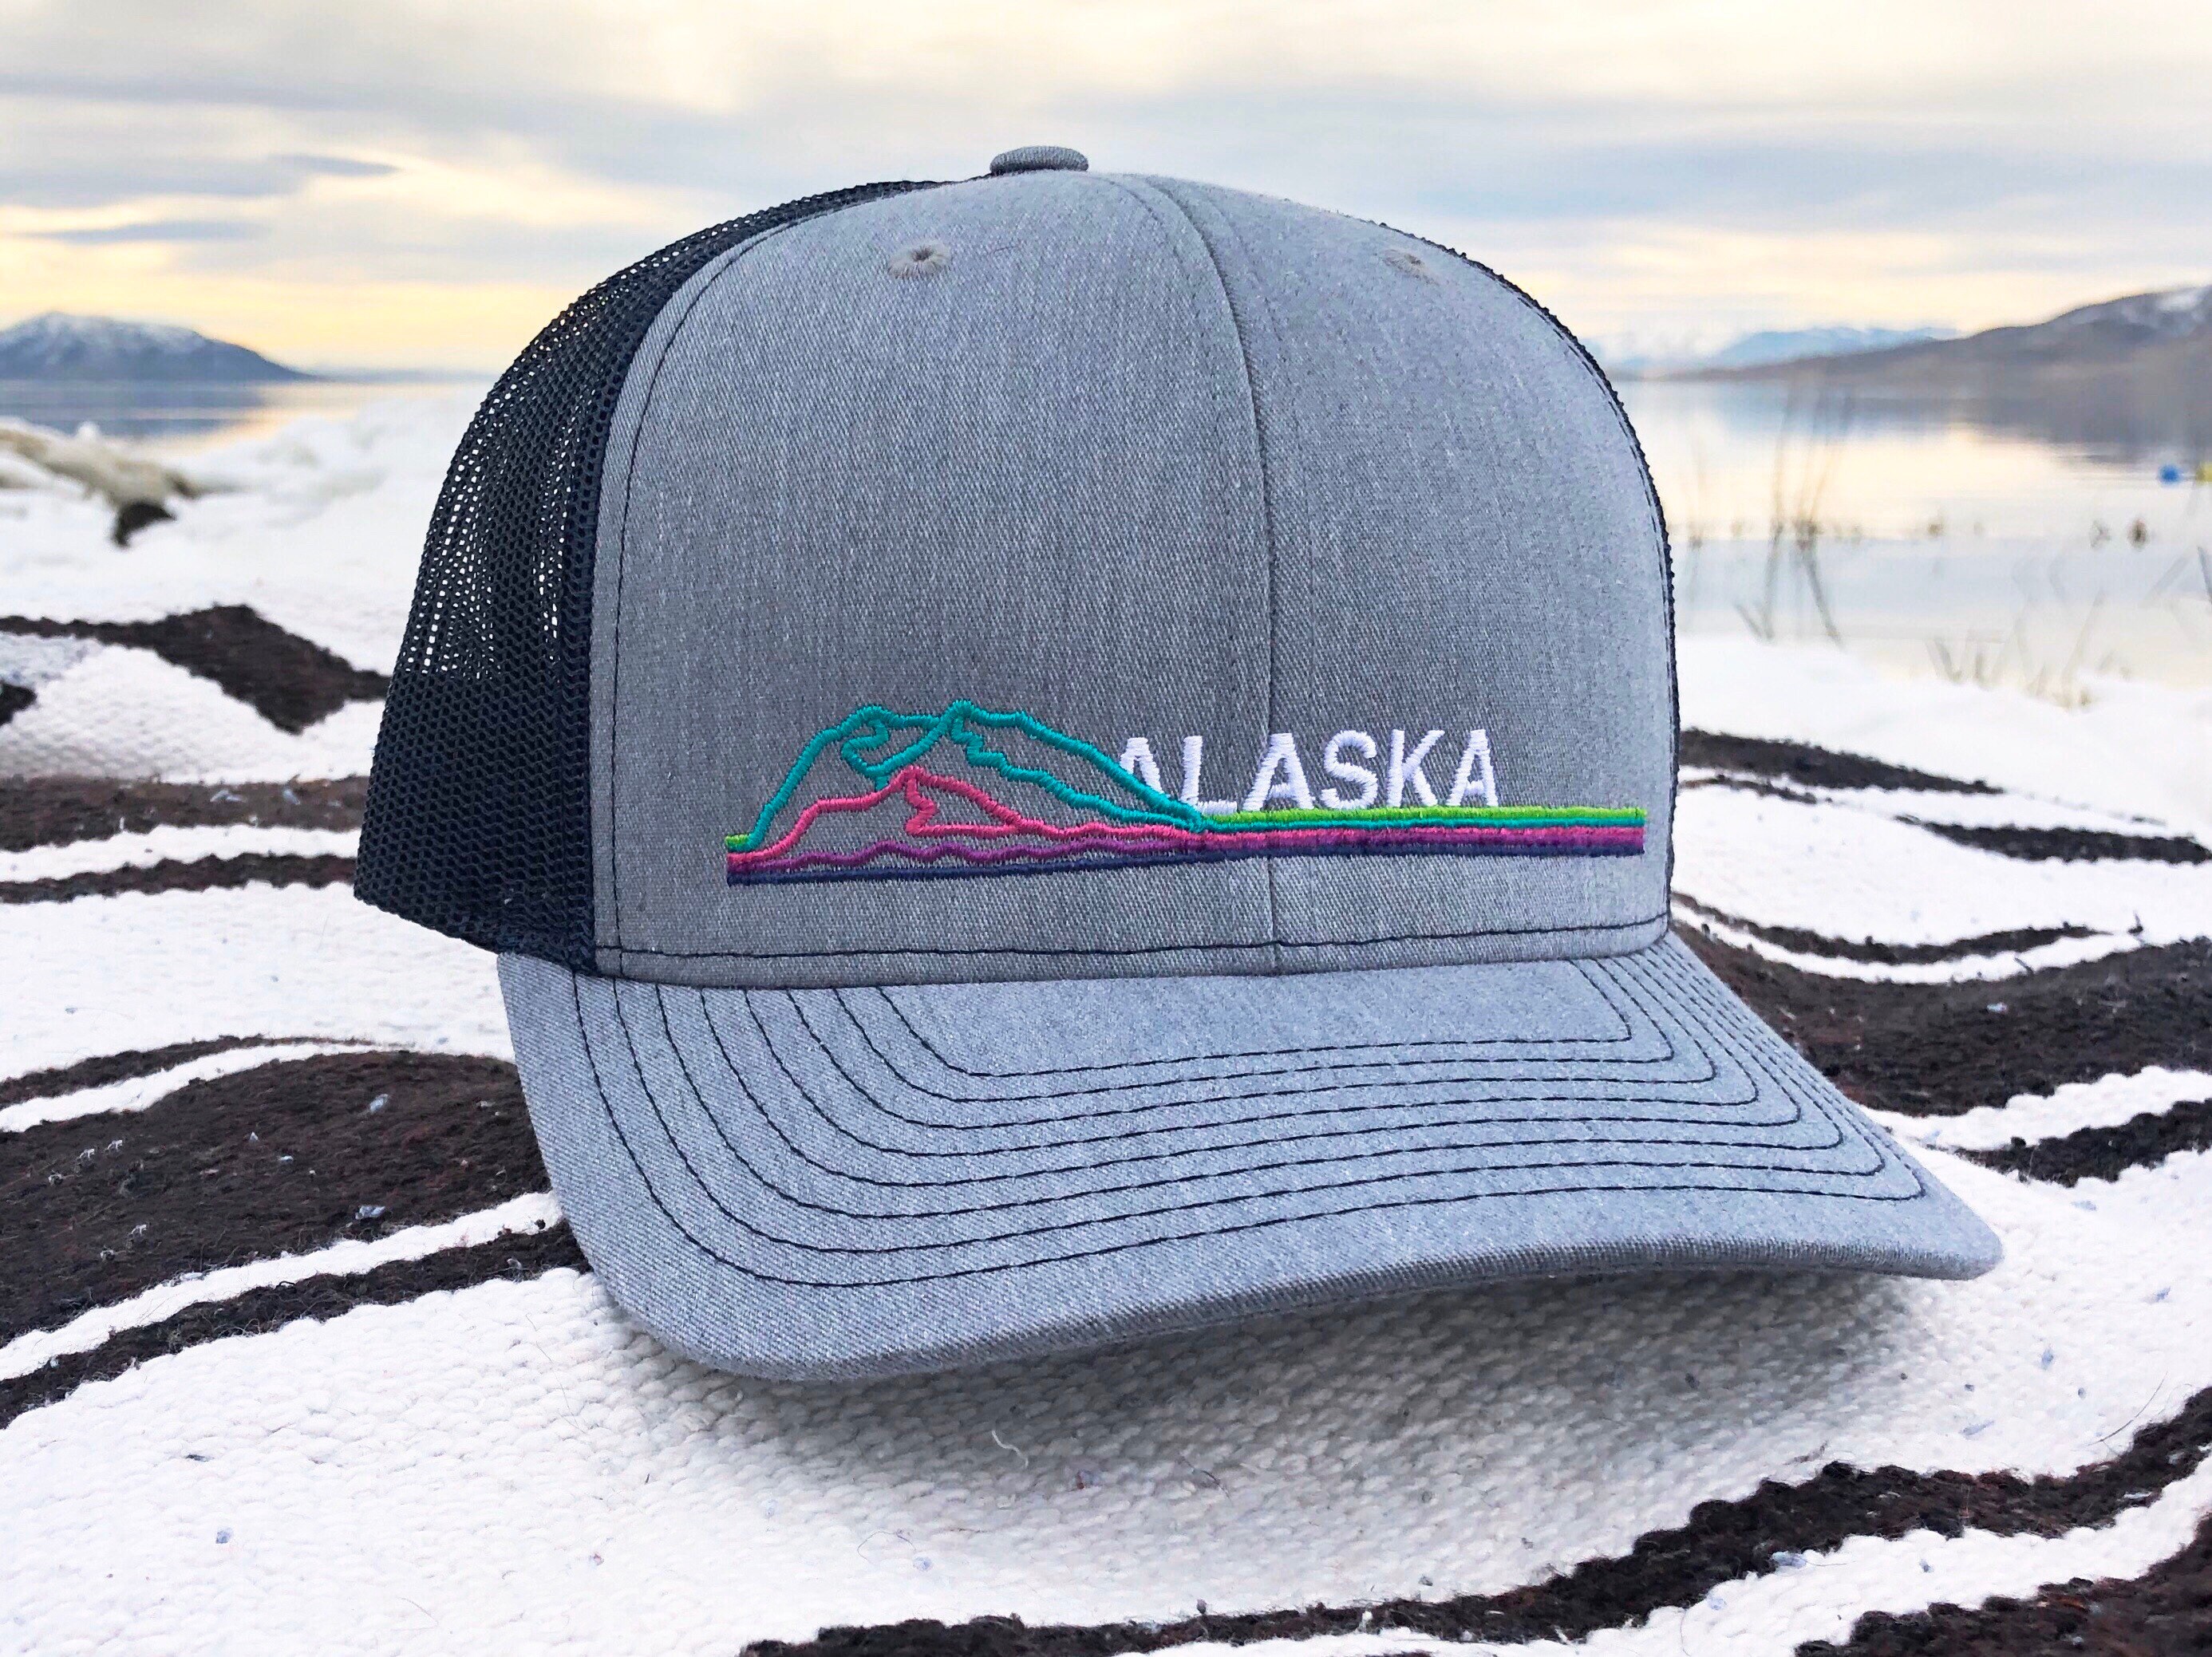 Montana Mountain Reflection Leather Patch Hat